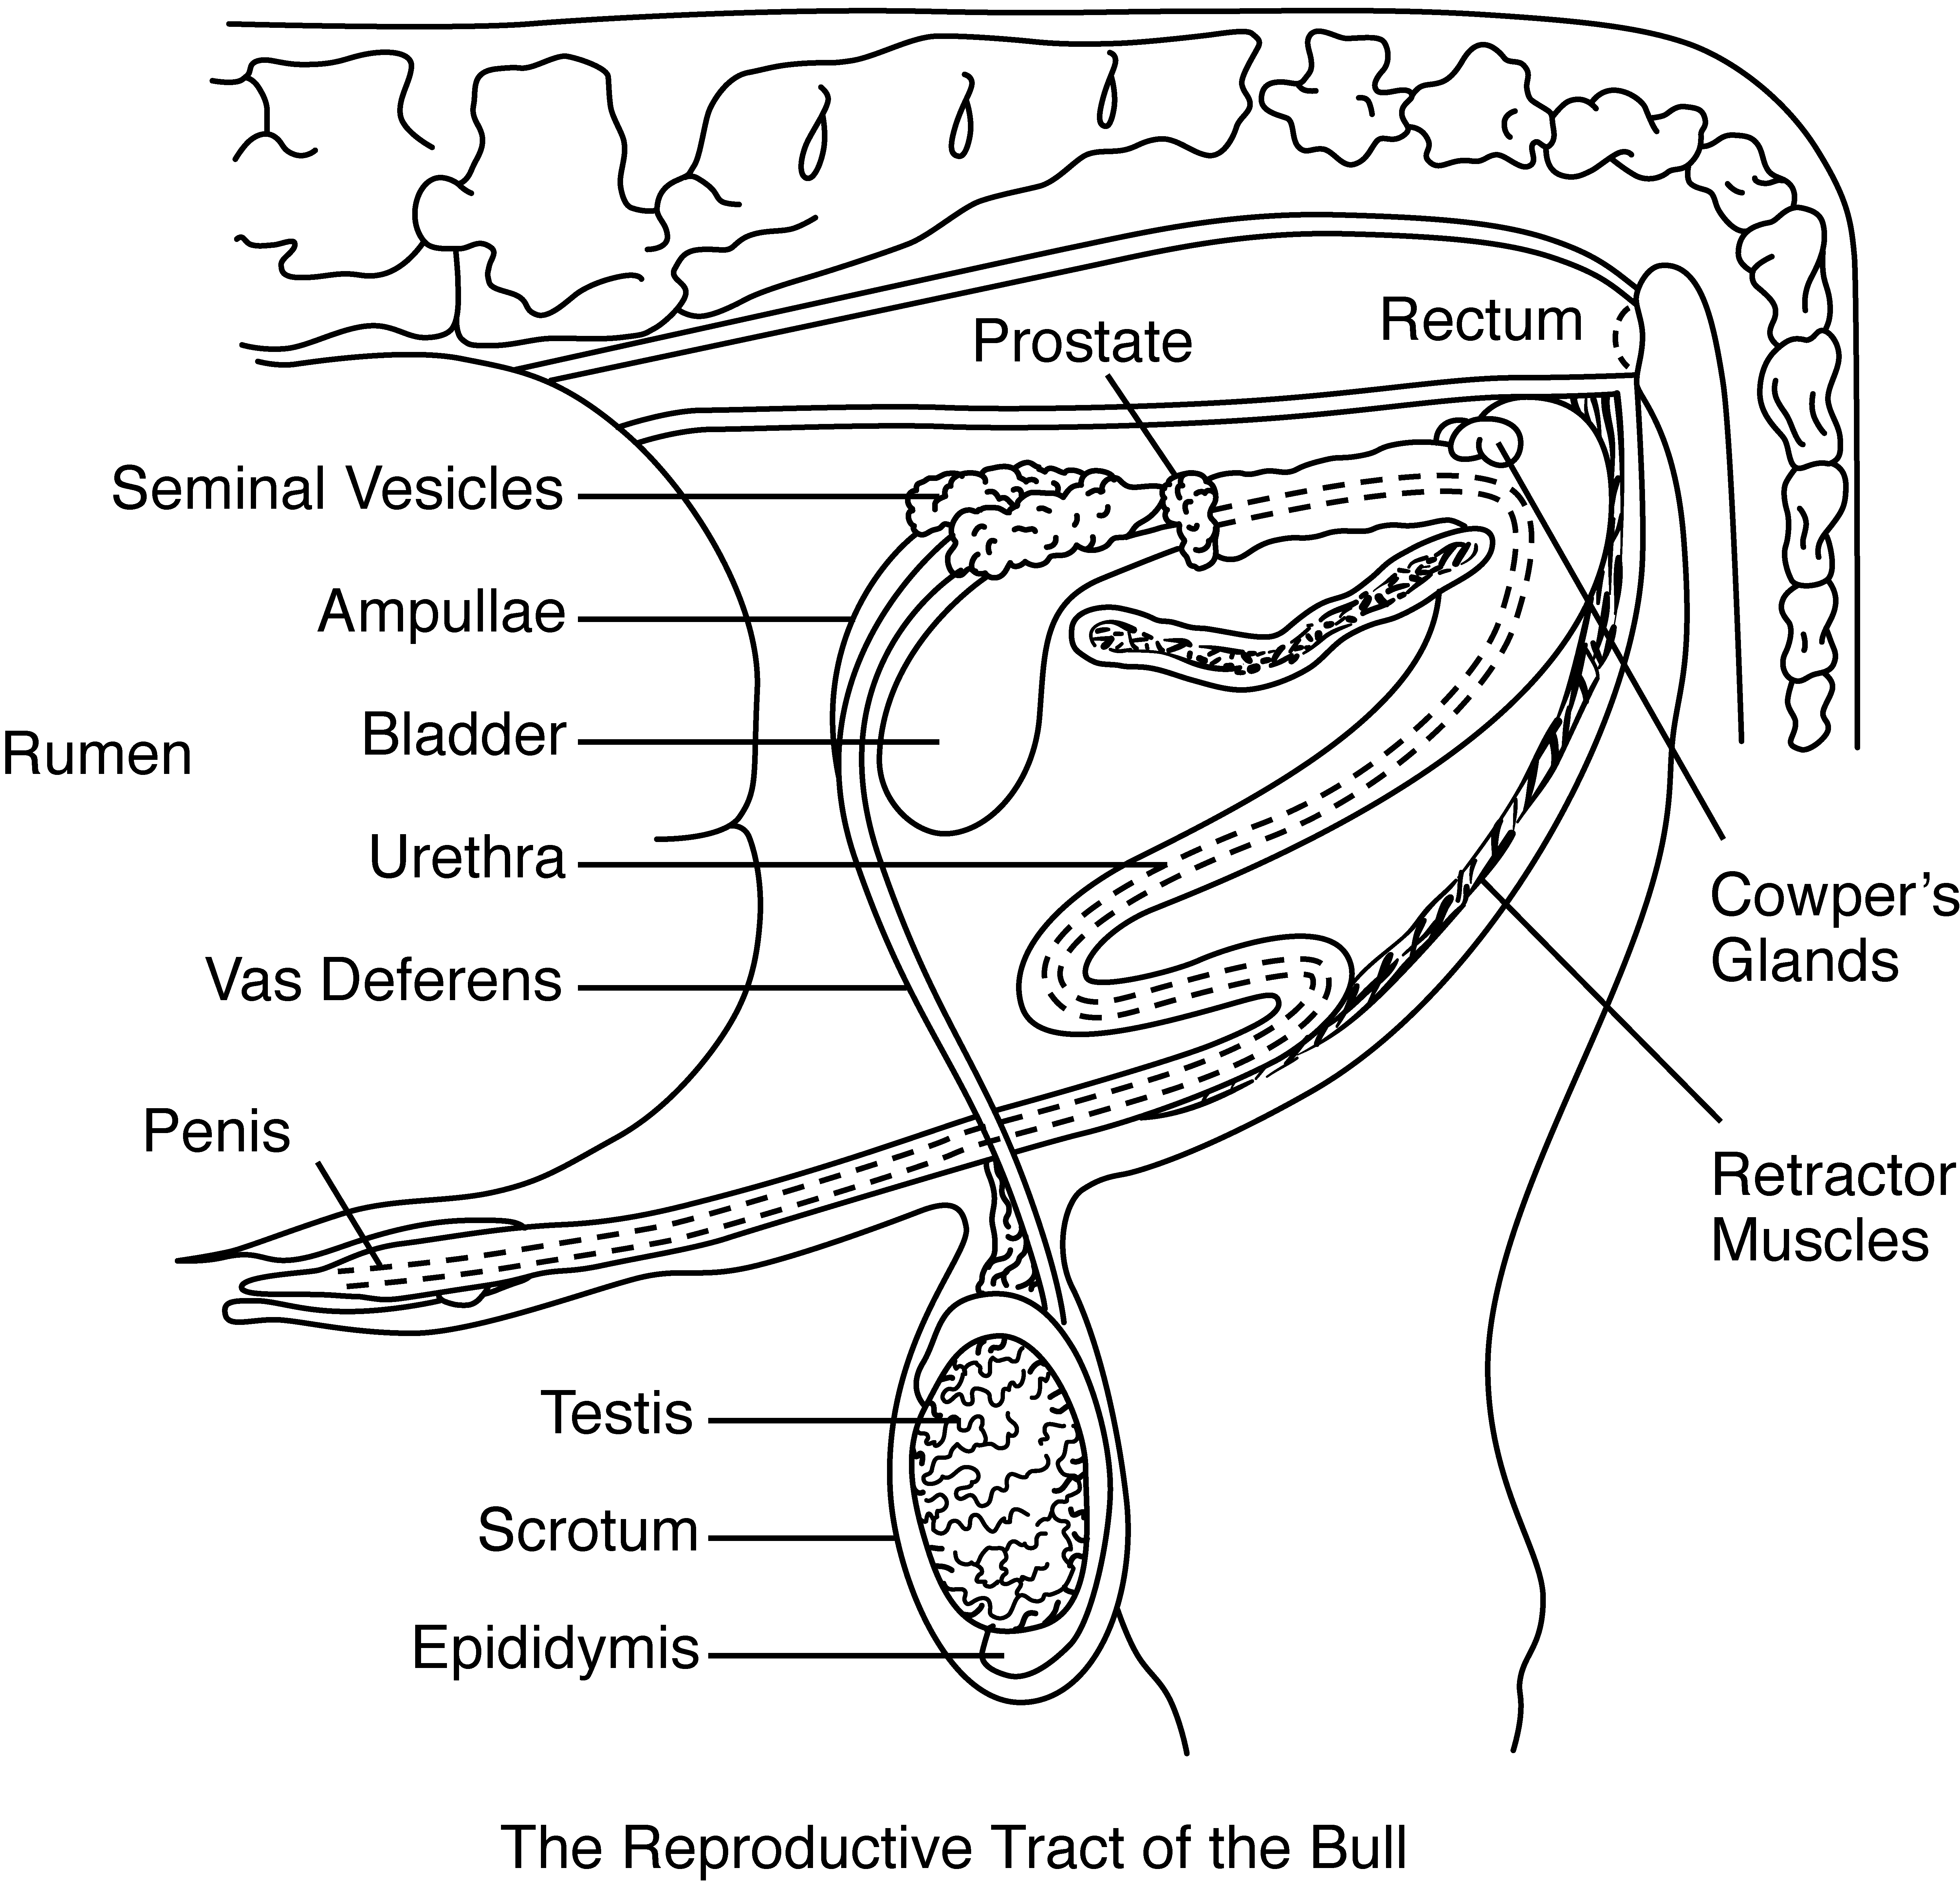 The reproductive tract of the bull